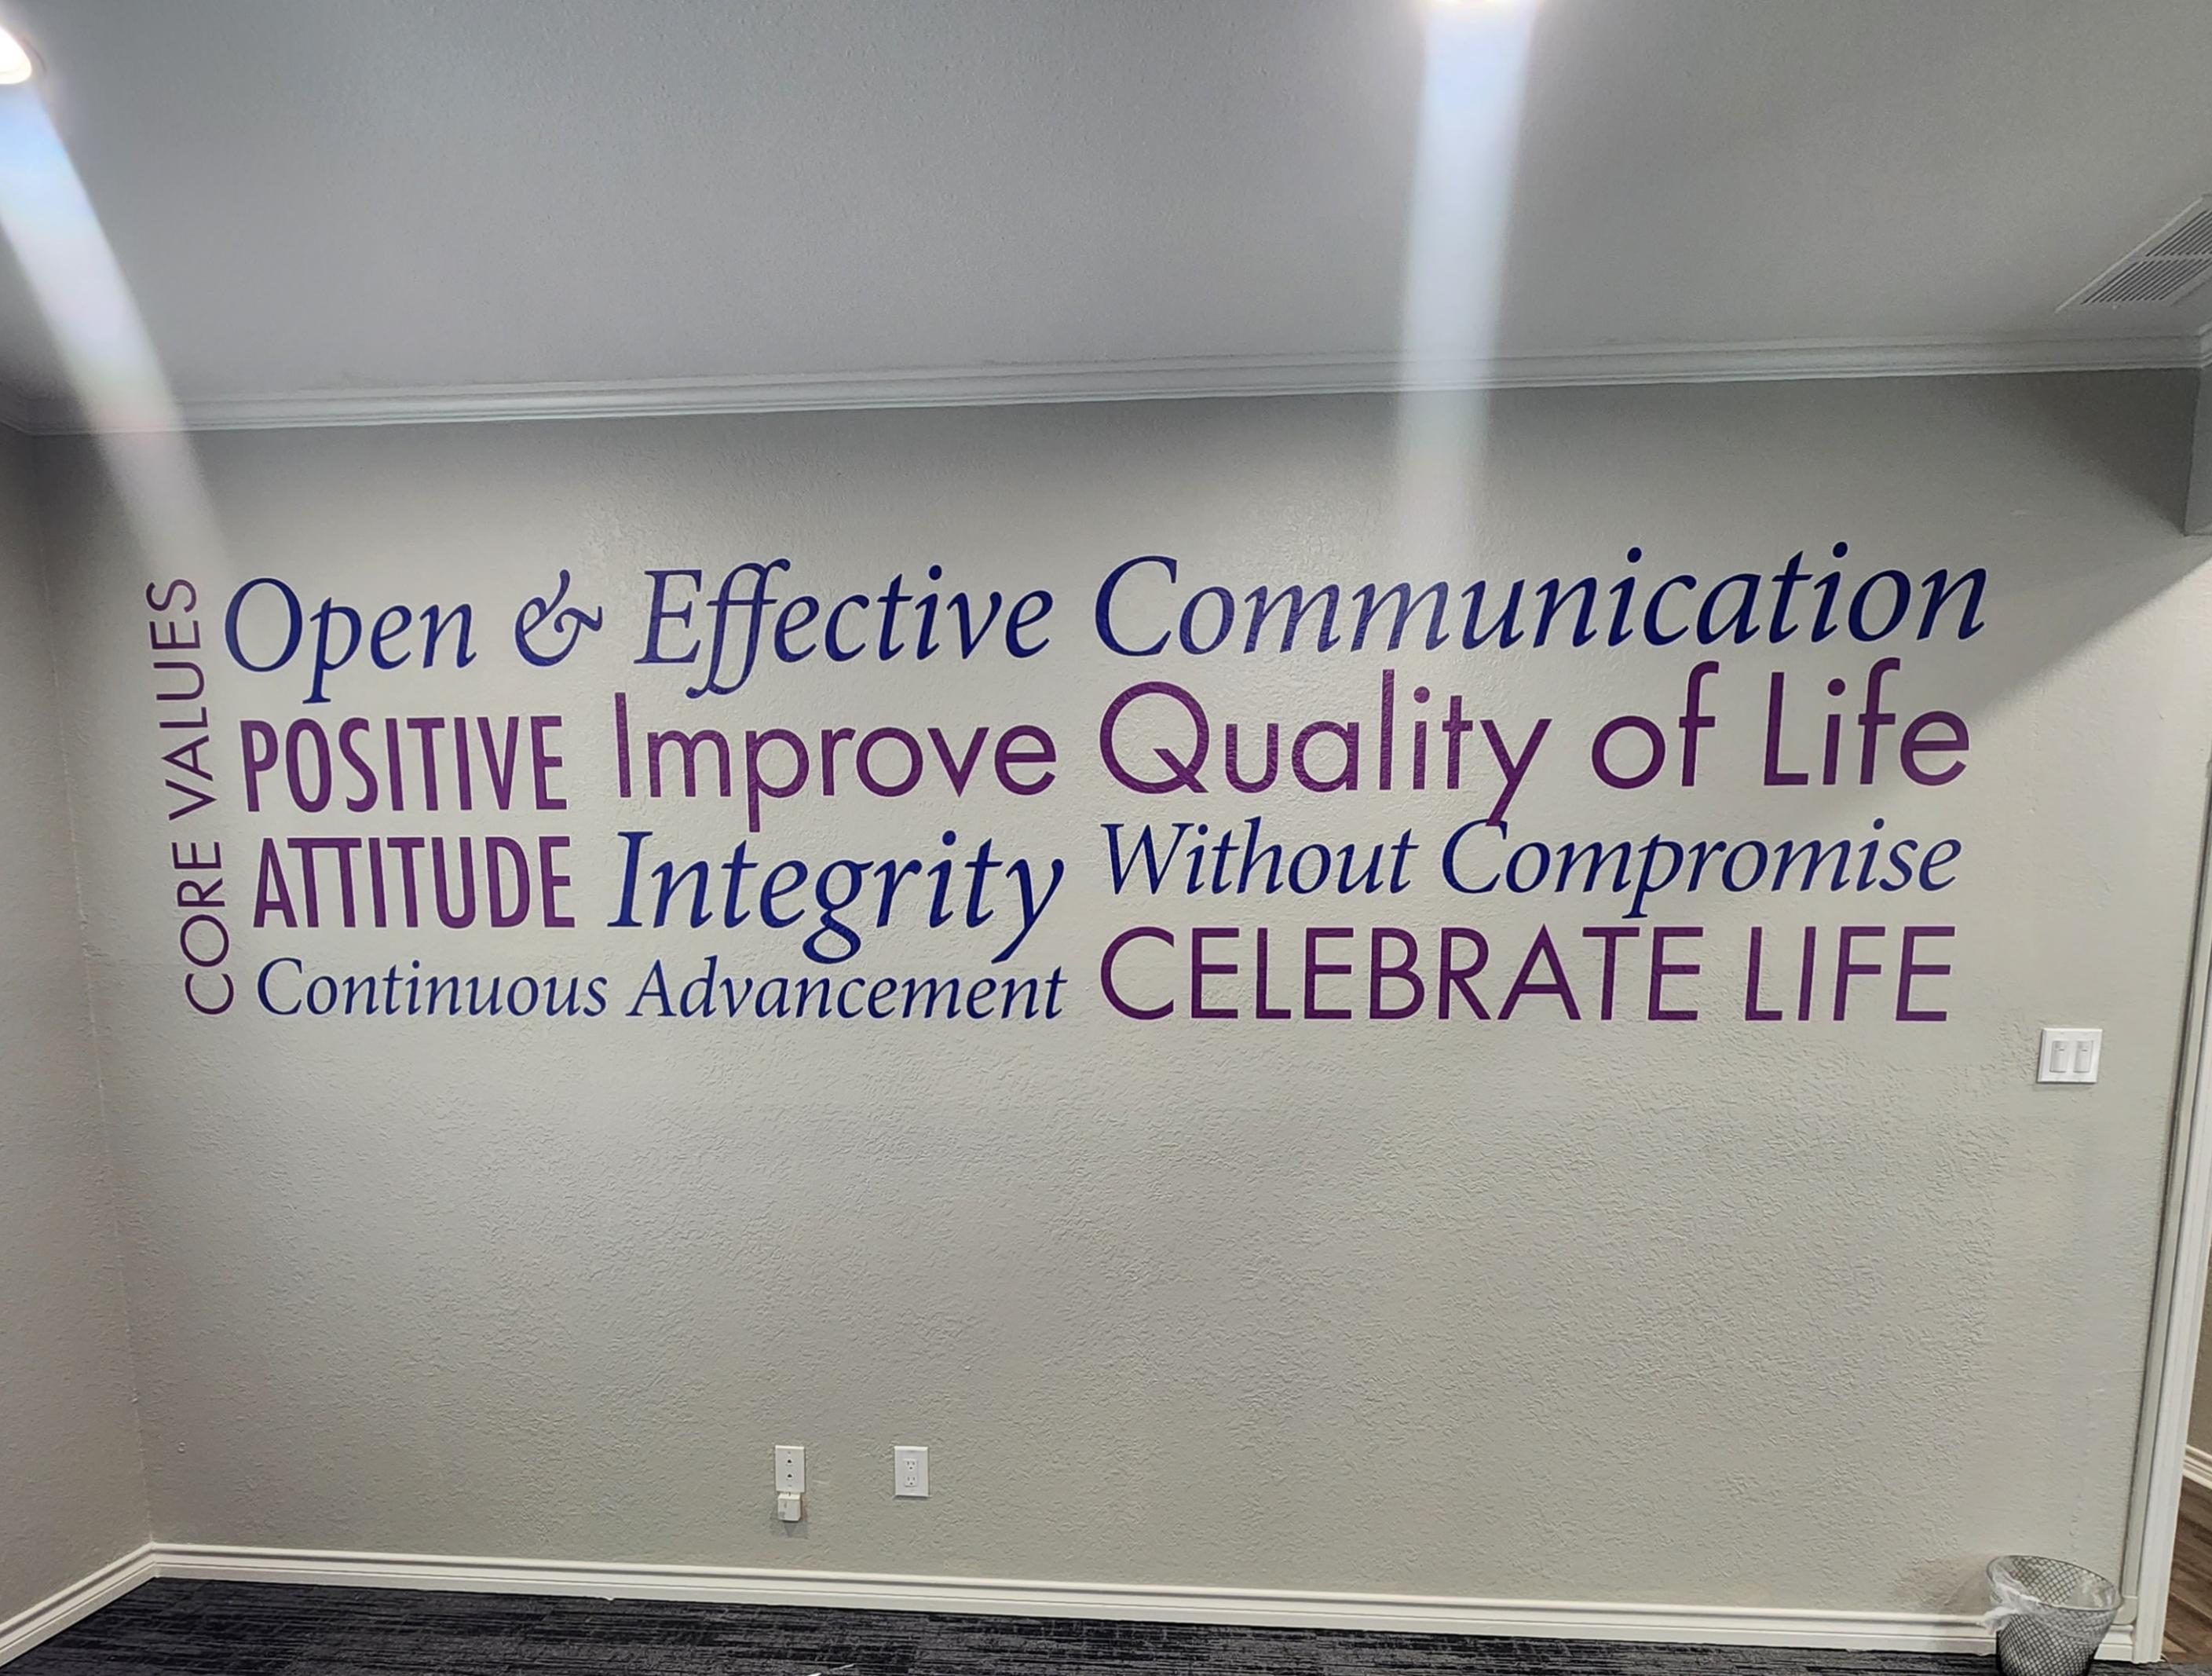 Our core values are prominently displayed on the wall, serving as a constant reminder to uphold them every day.